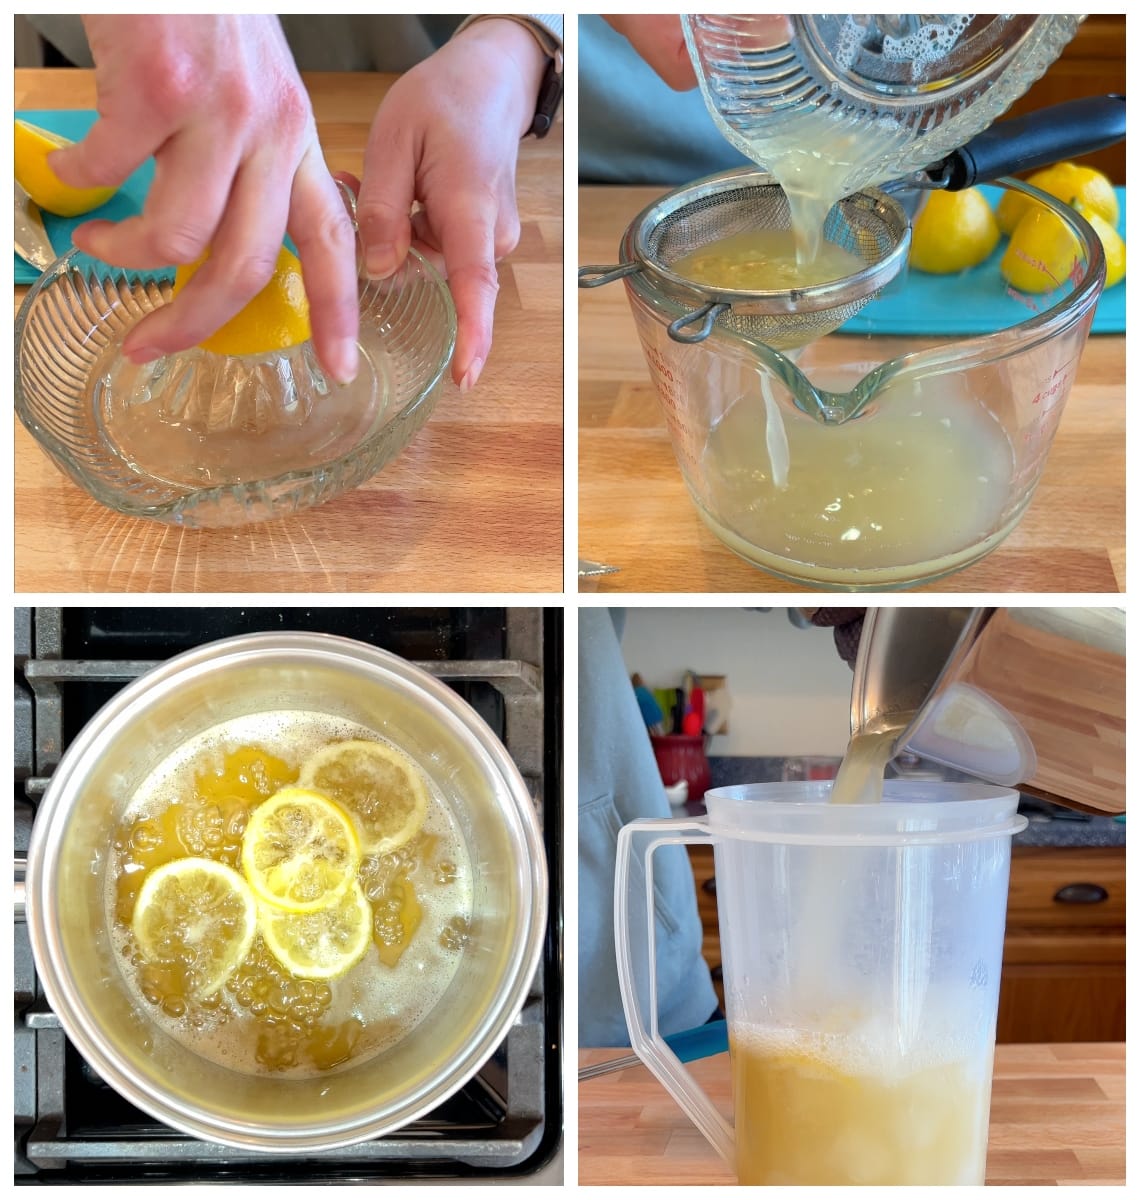 photo collage showing various steps to make homemade lemonade with fresh lemons.